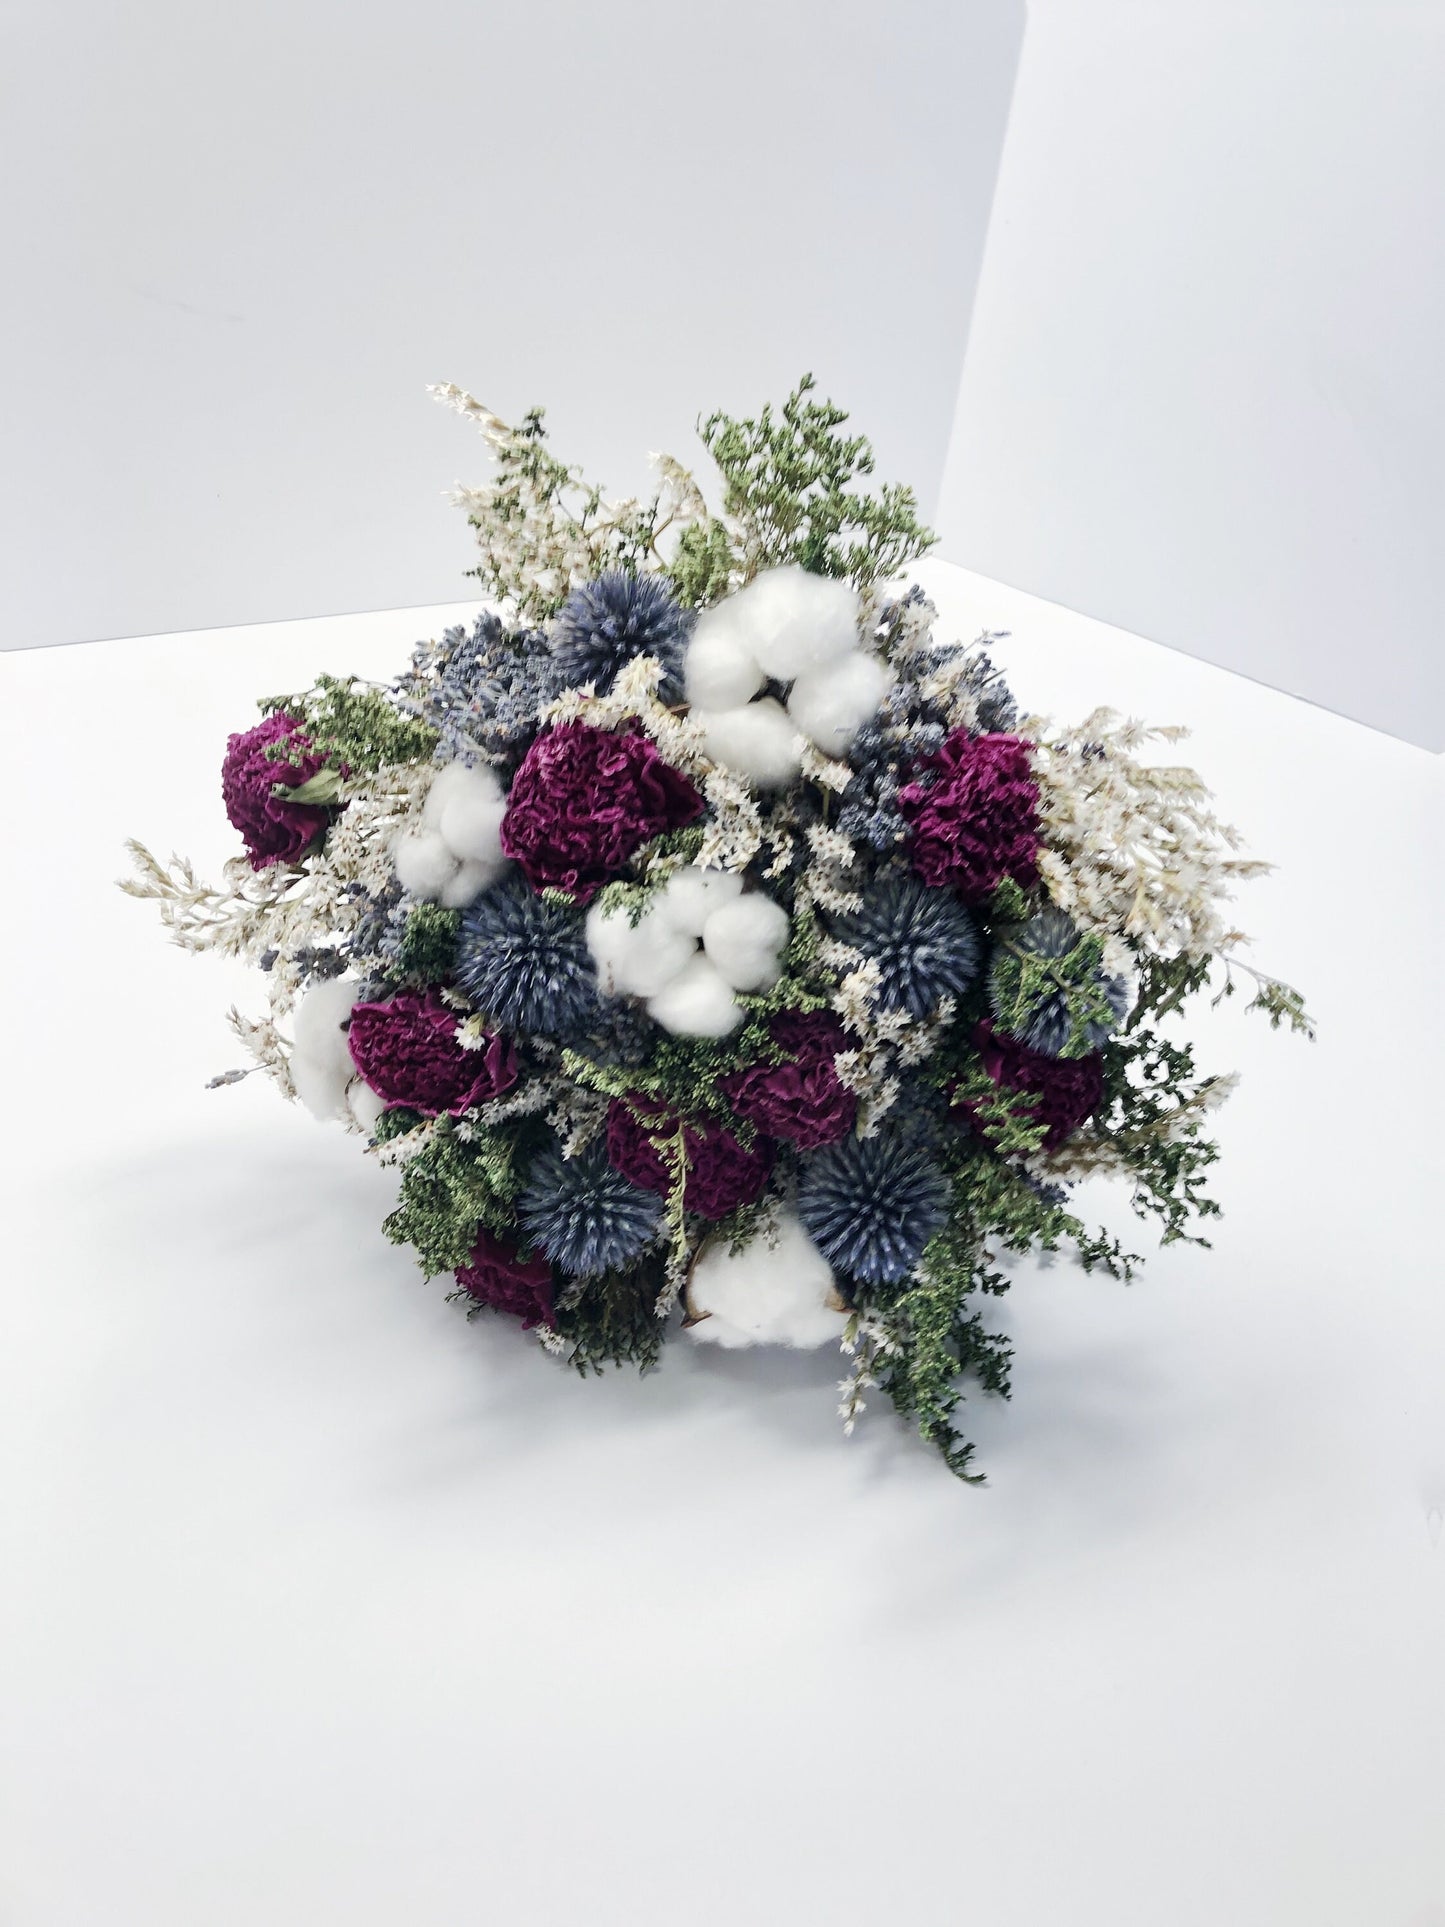 Wedding Bouquet, Preserved Flowers,  globe thistle, Peony, German statice, cotton, colorful, decor, green, pink, blue, burgundy